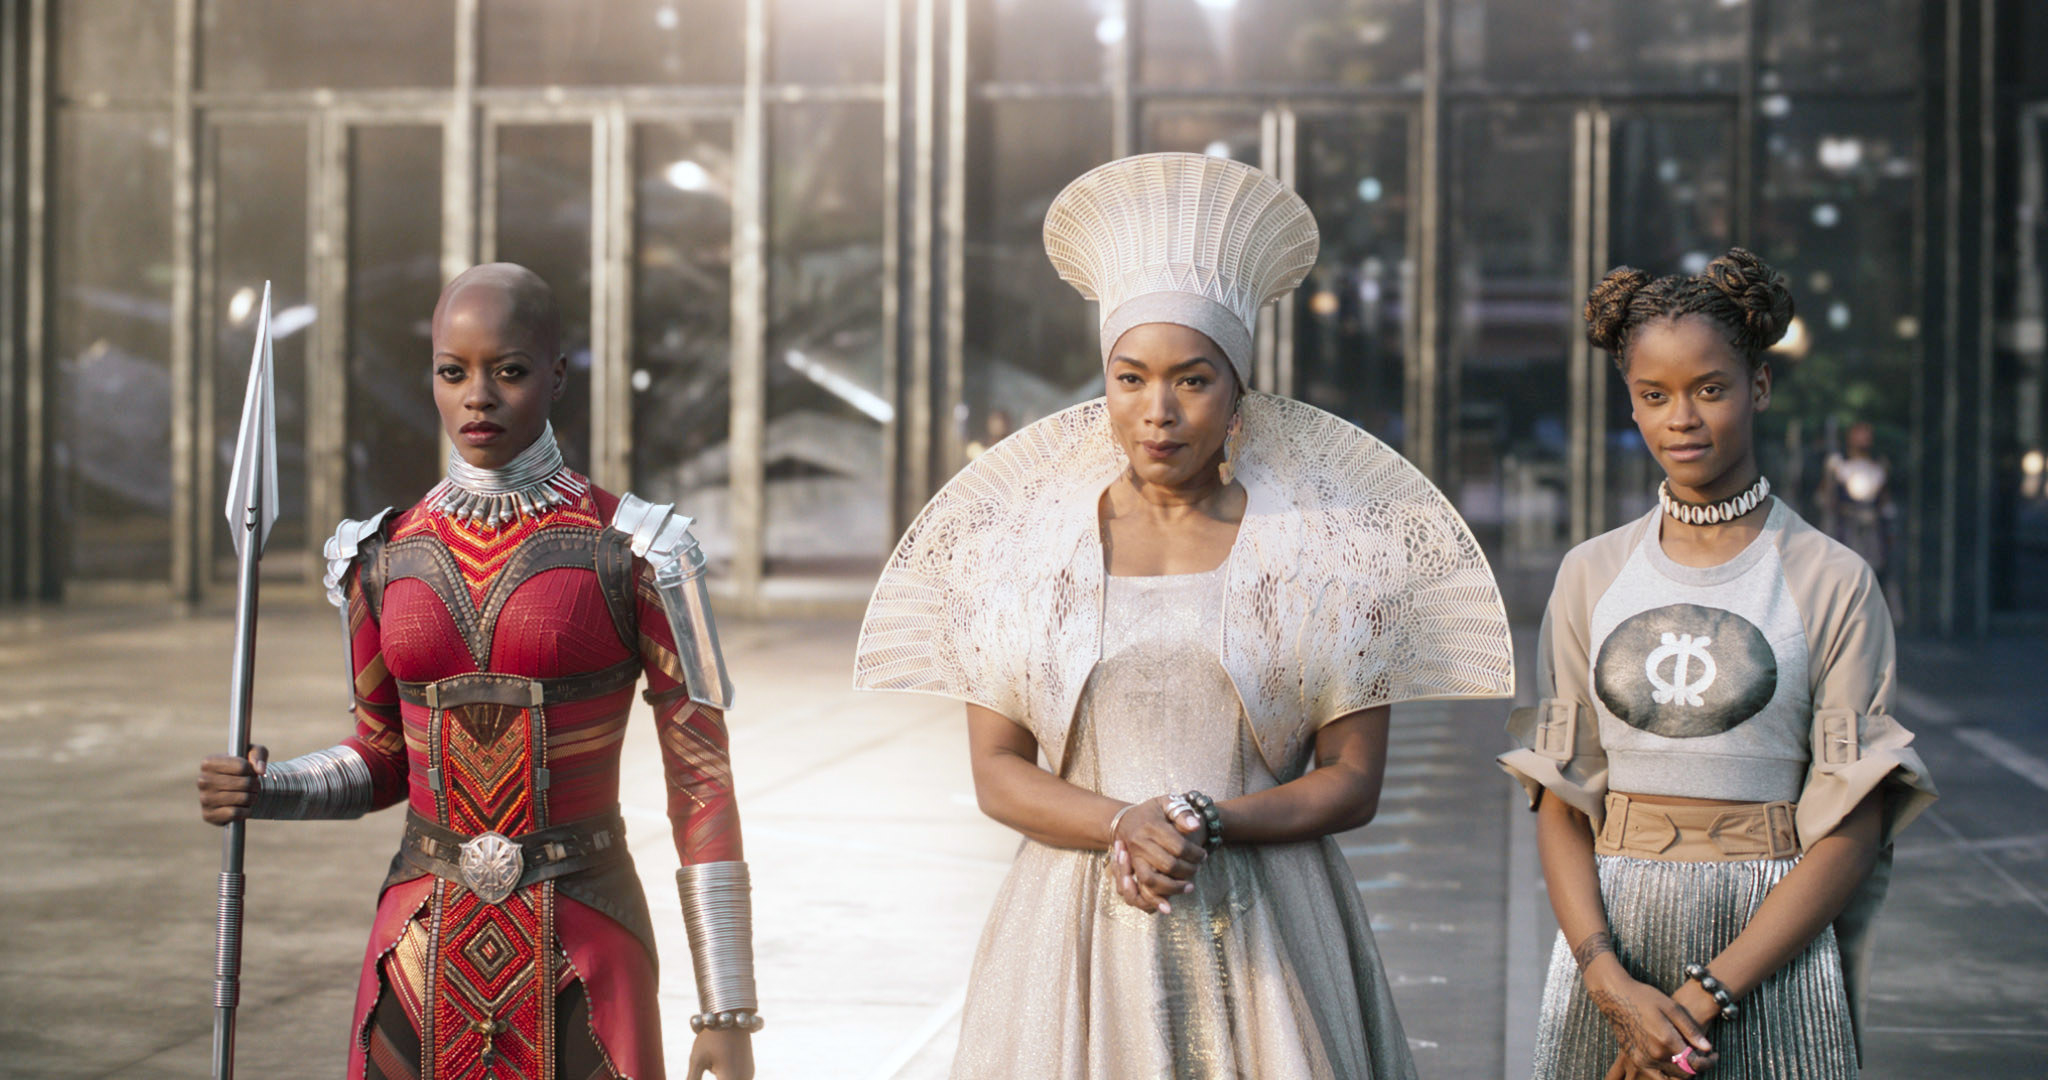 a warrior, a queen, and a princess from the fictional African nation of Wakanda